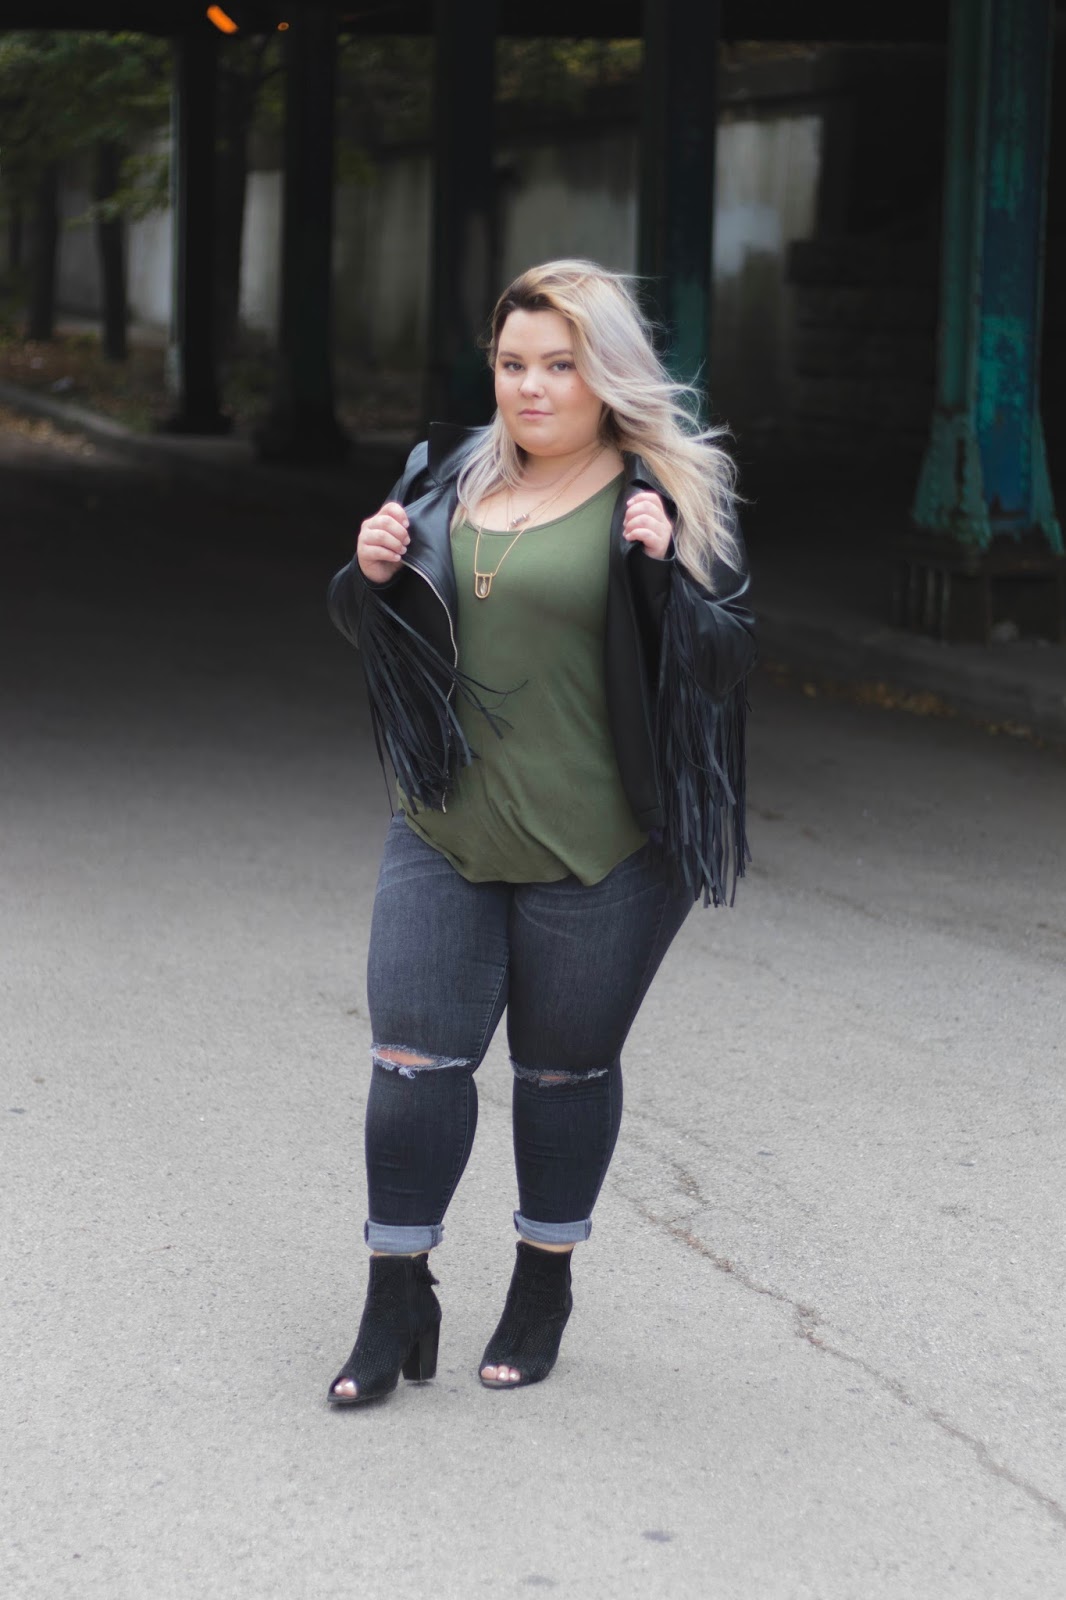 natalie in the city, natalie Craig, plus size fashion, Chicago plus size fashion blogger, affordable plus size clothes, fashion to figure, fringe faux leather moto jacket, plus size leather jacket, target mossimo jeans, best plus size jeans, open toed wide width booties, midwest blogger, Chicago plus size model, curves and confidence